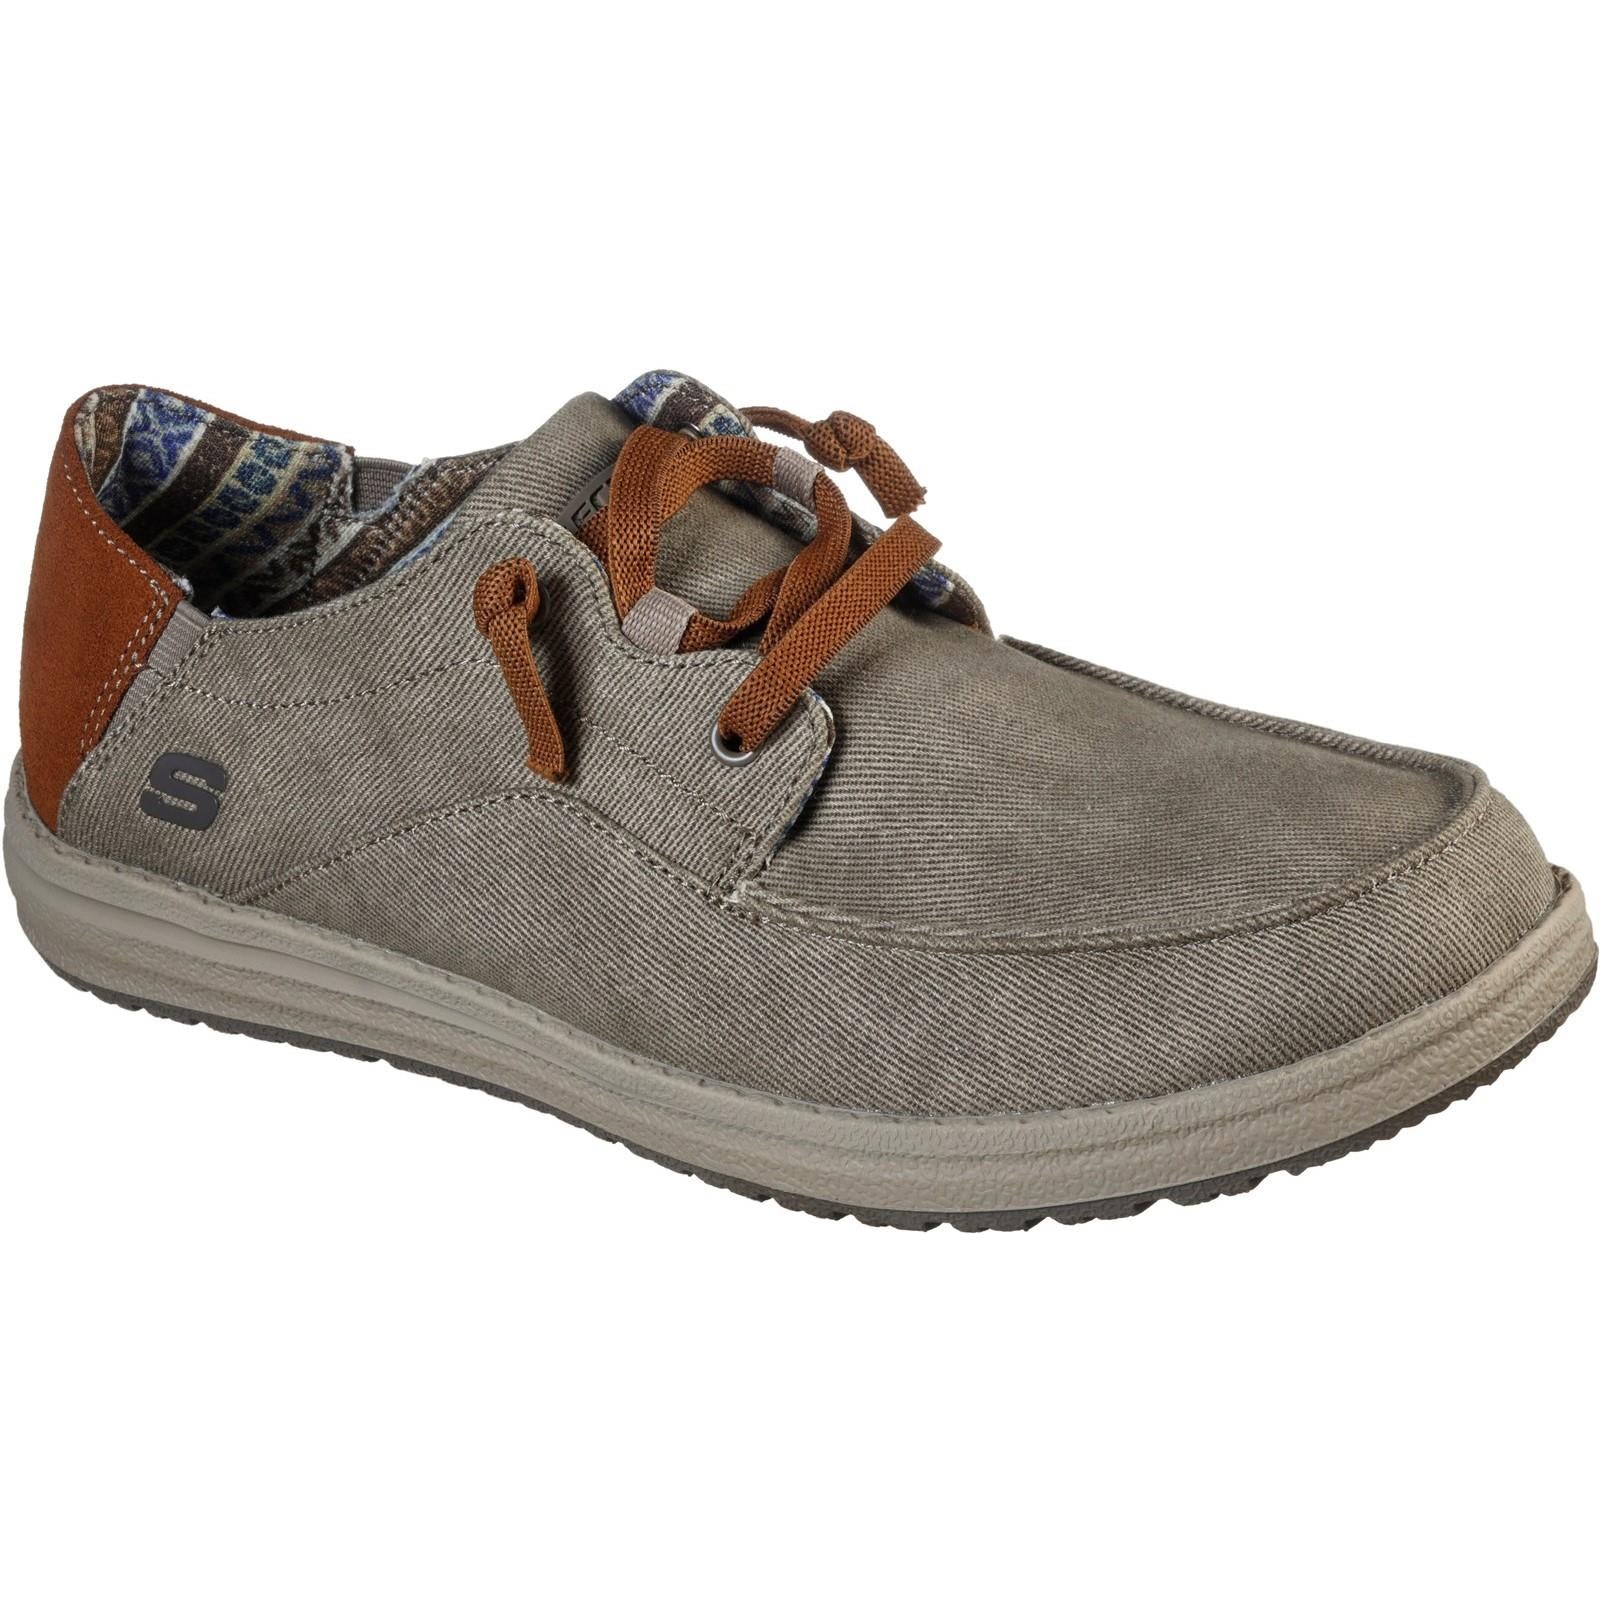 Skechers Melson Planon taupe memory foam slip on canvas shoes